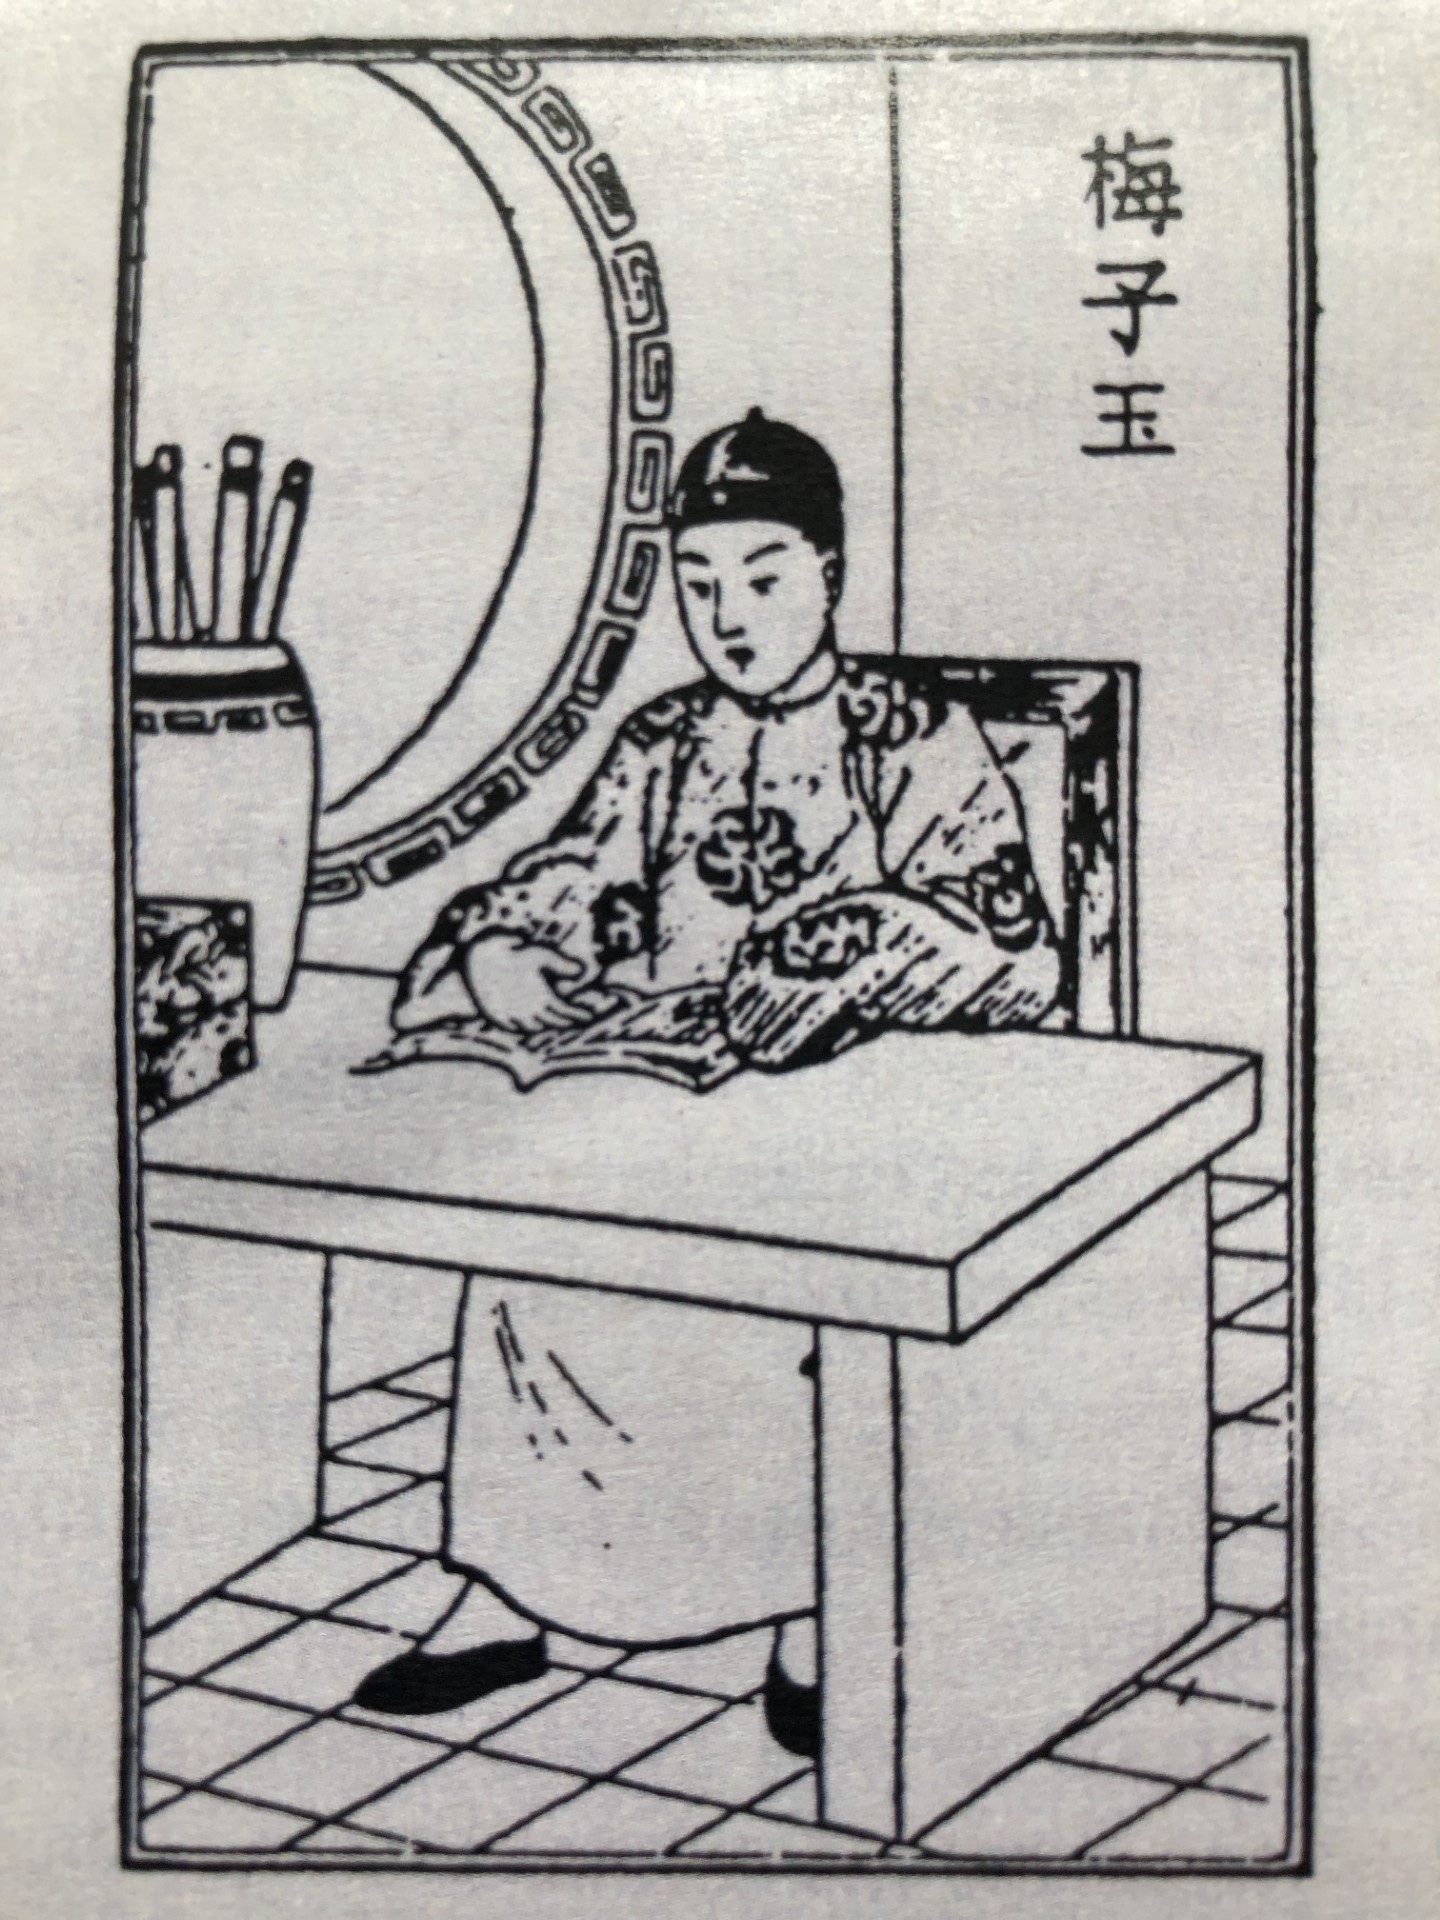 Illustration of a person writing from Precious Mirror